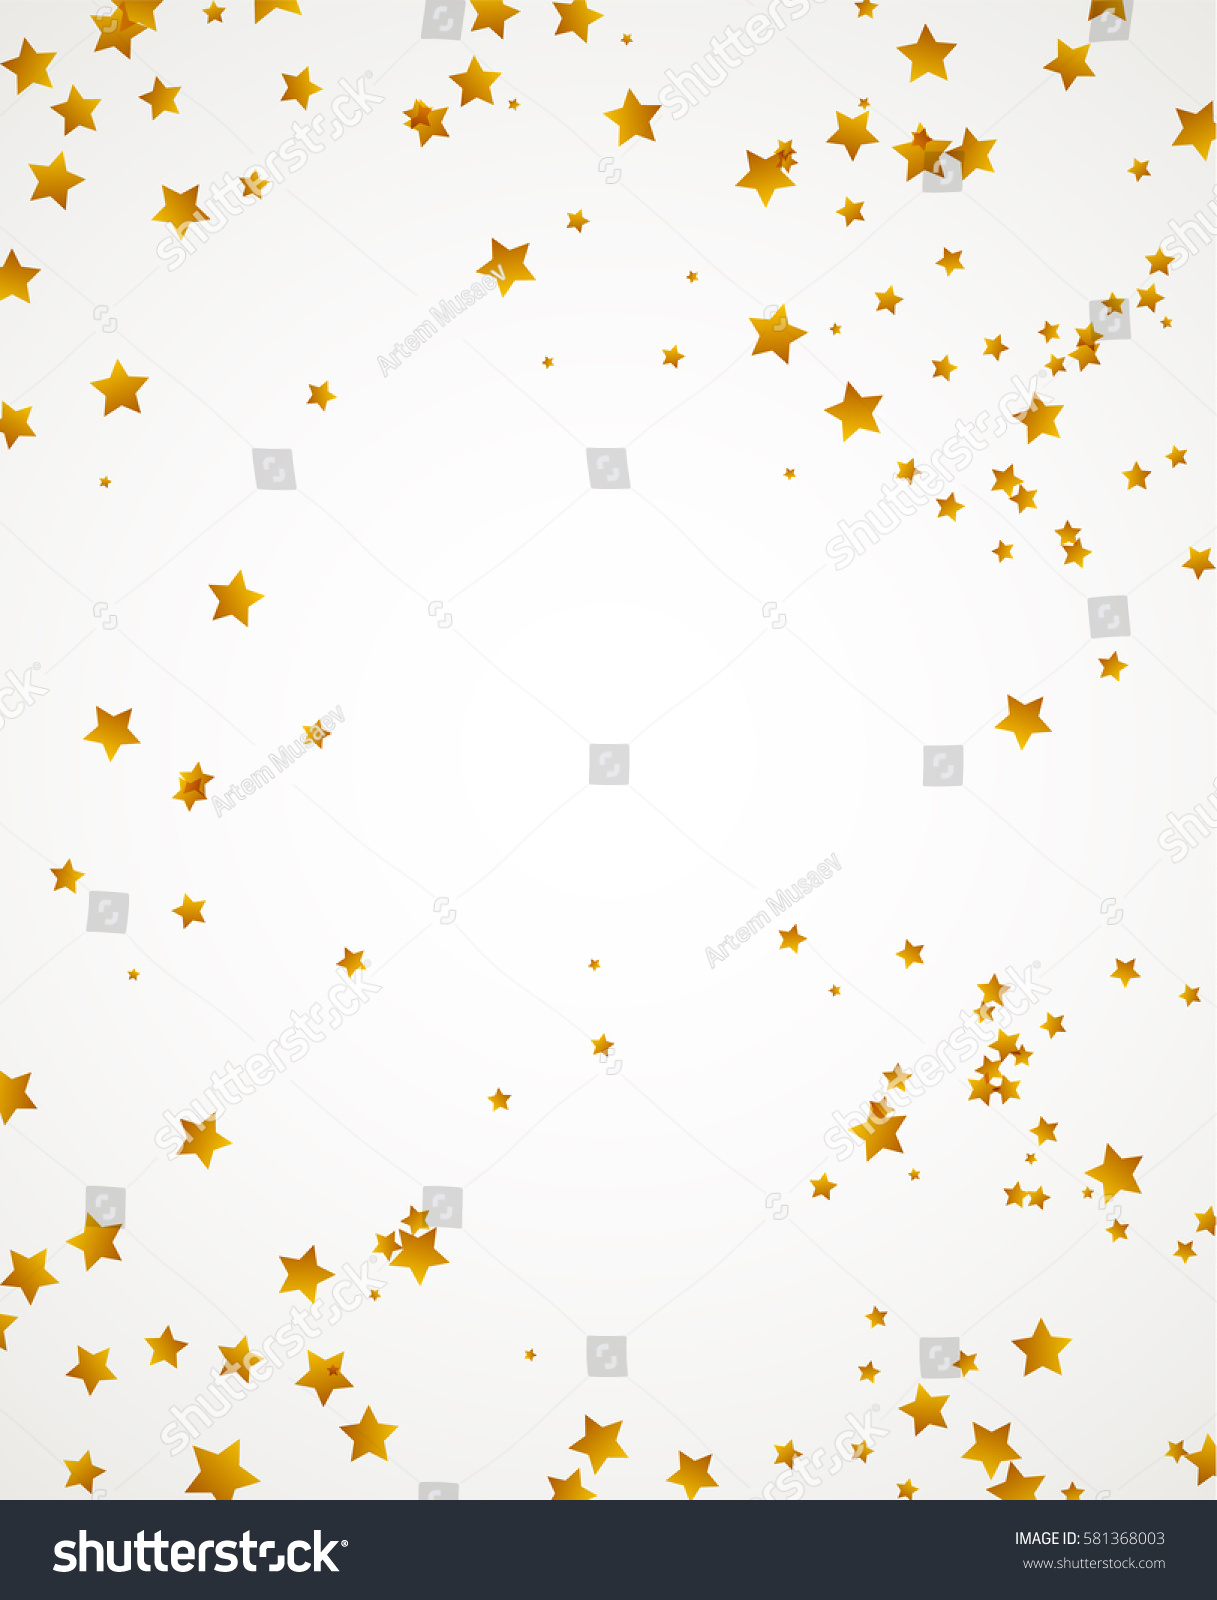 Vector Chaotic Gold Foil Stars On Stock Vector 581368003